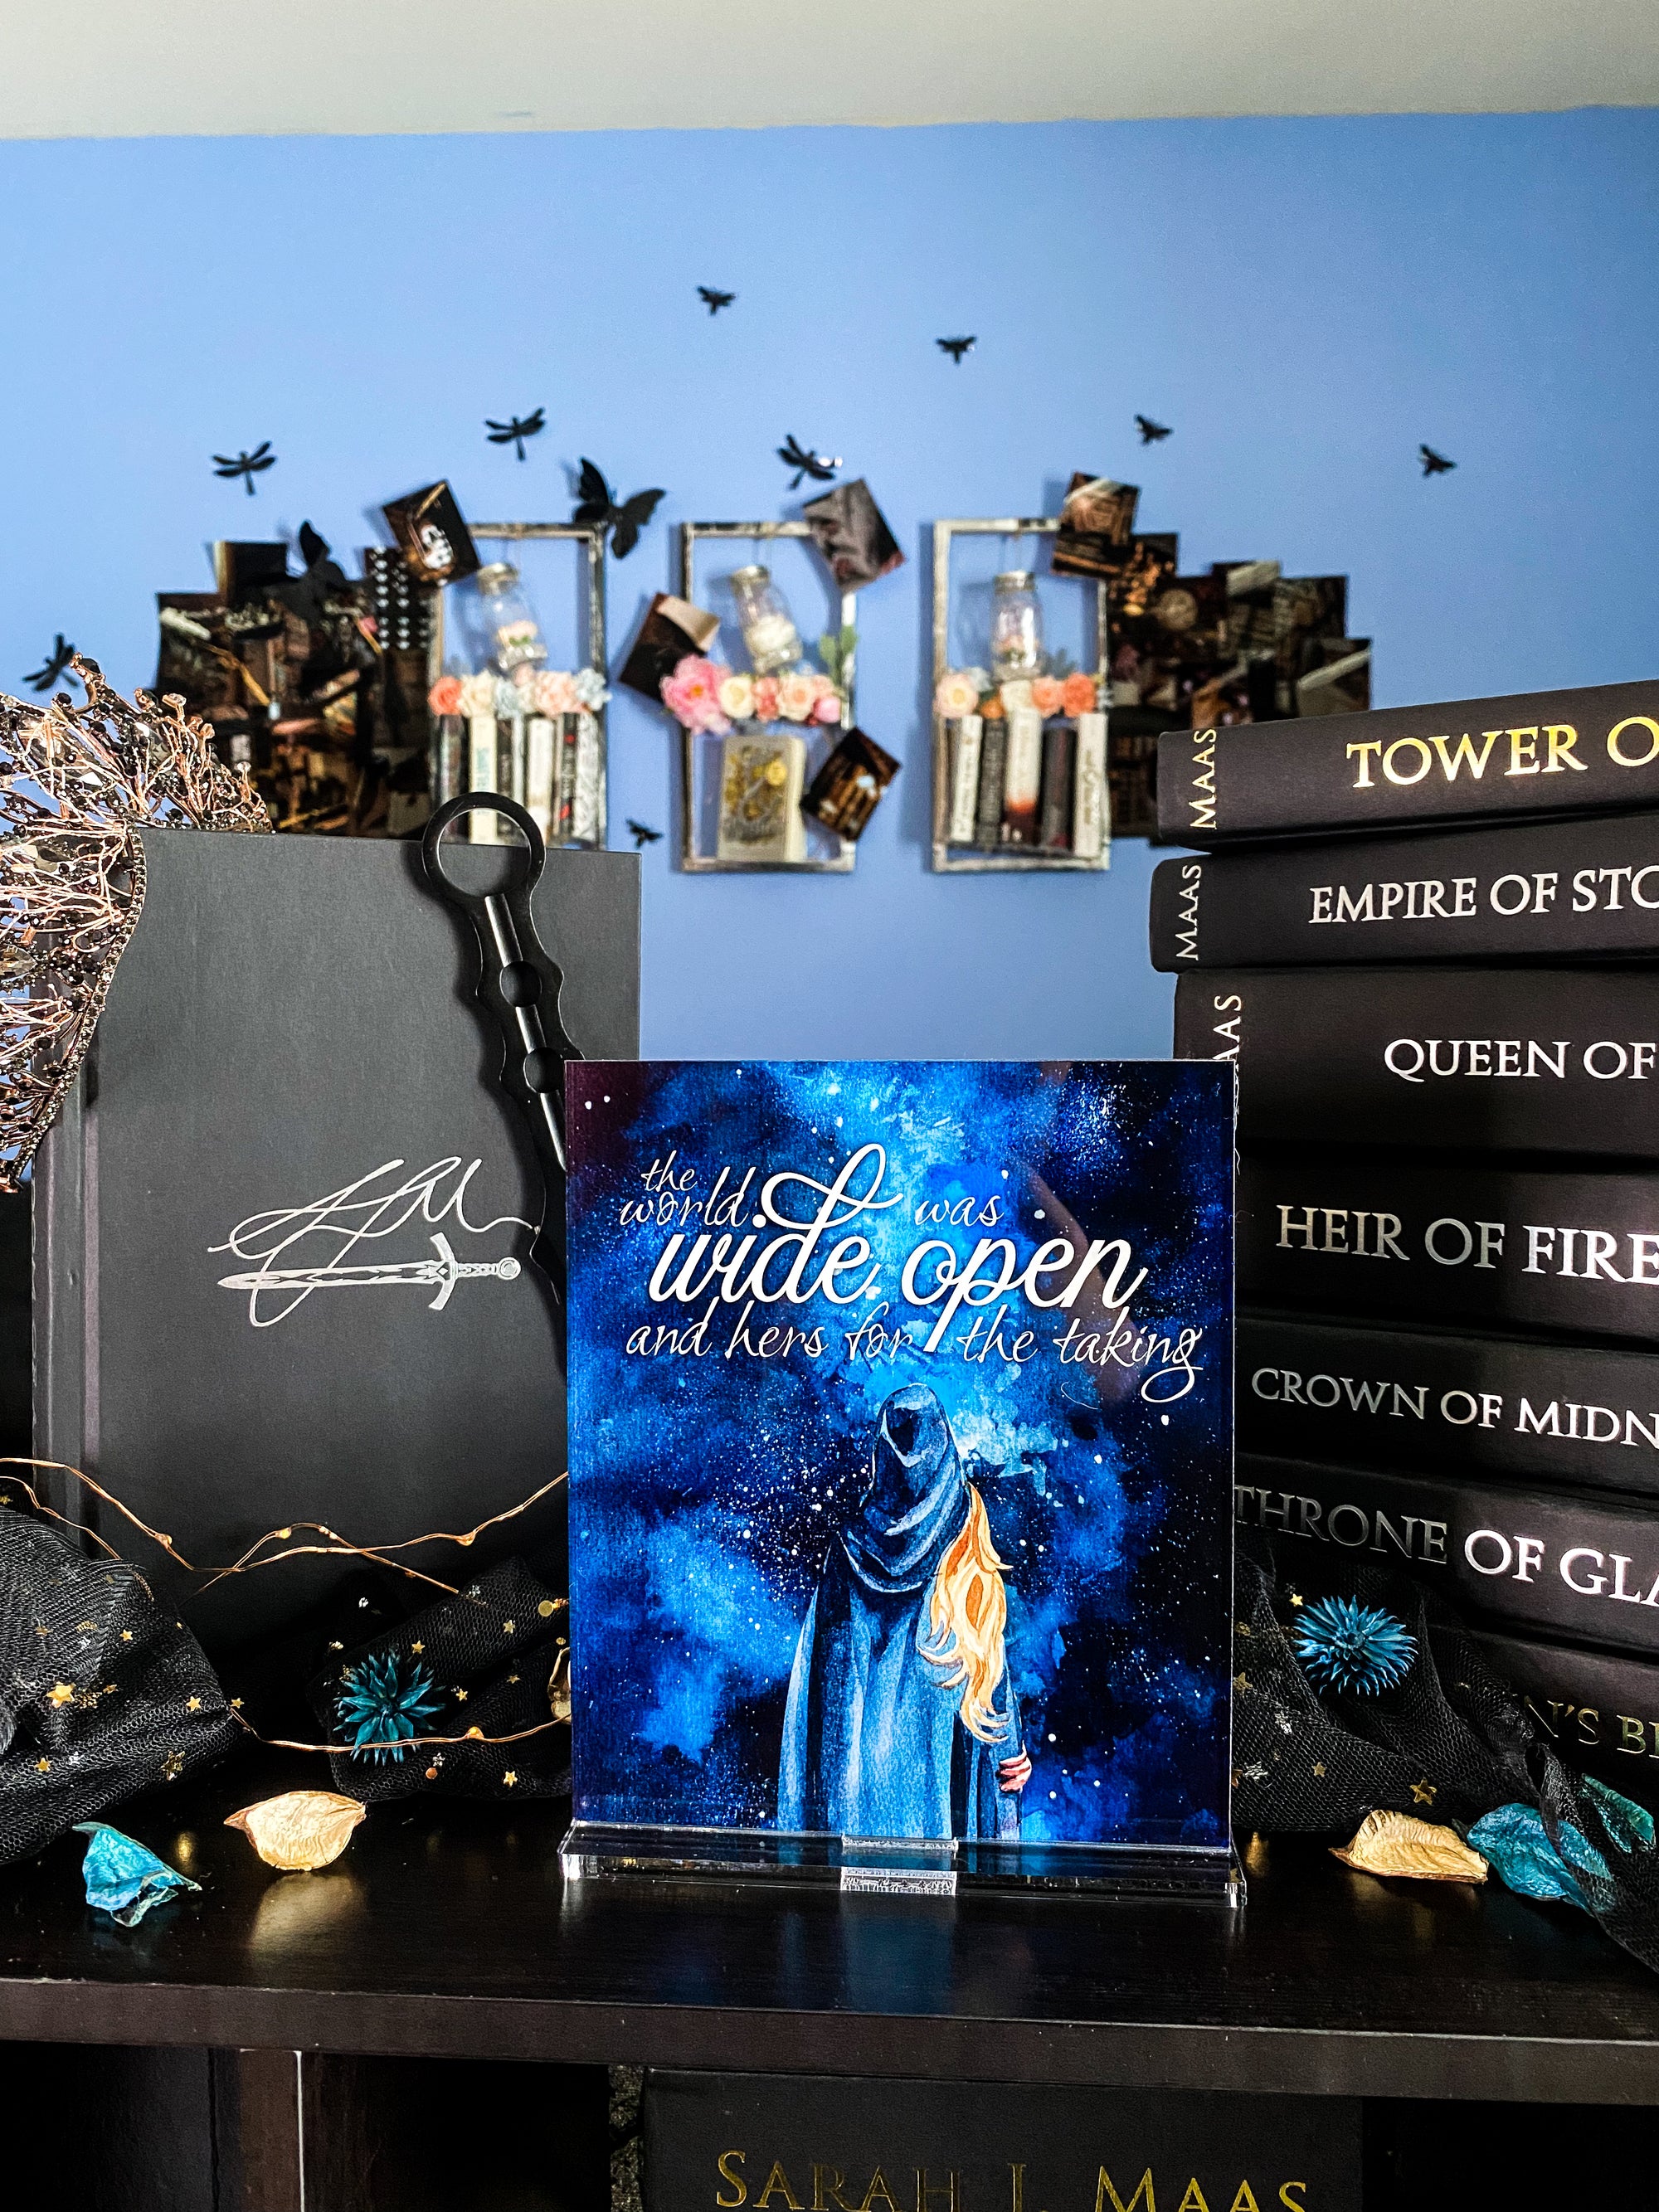 "The world was wide open..." - Throne of Glass Series - Freestanding Bookshelf / Desktop Acrylic Accessory - Officially licensed by Sarah J. Maas - D29